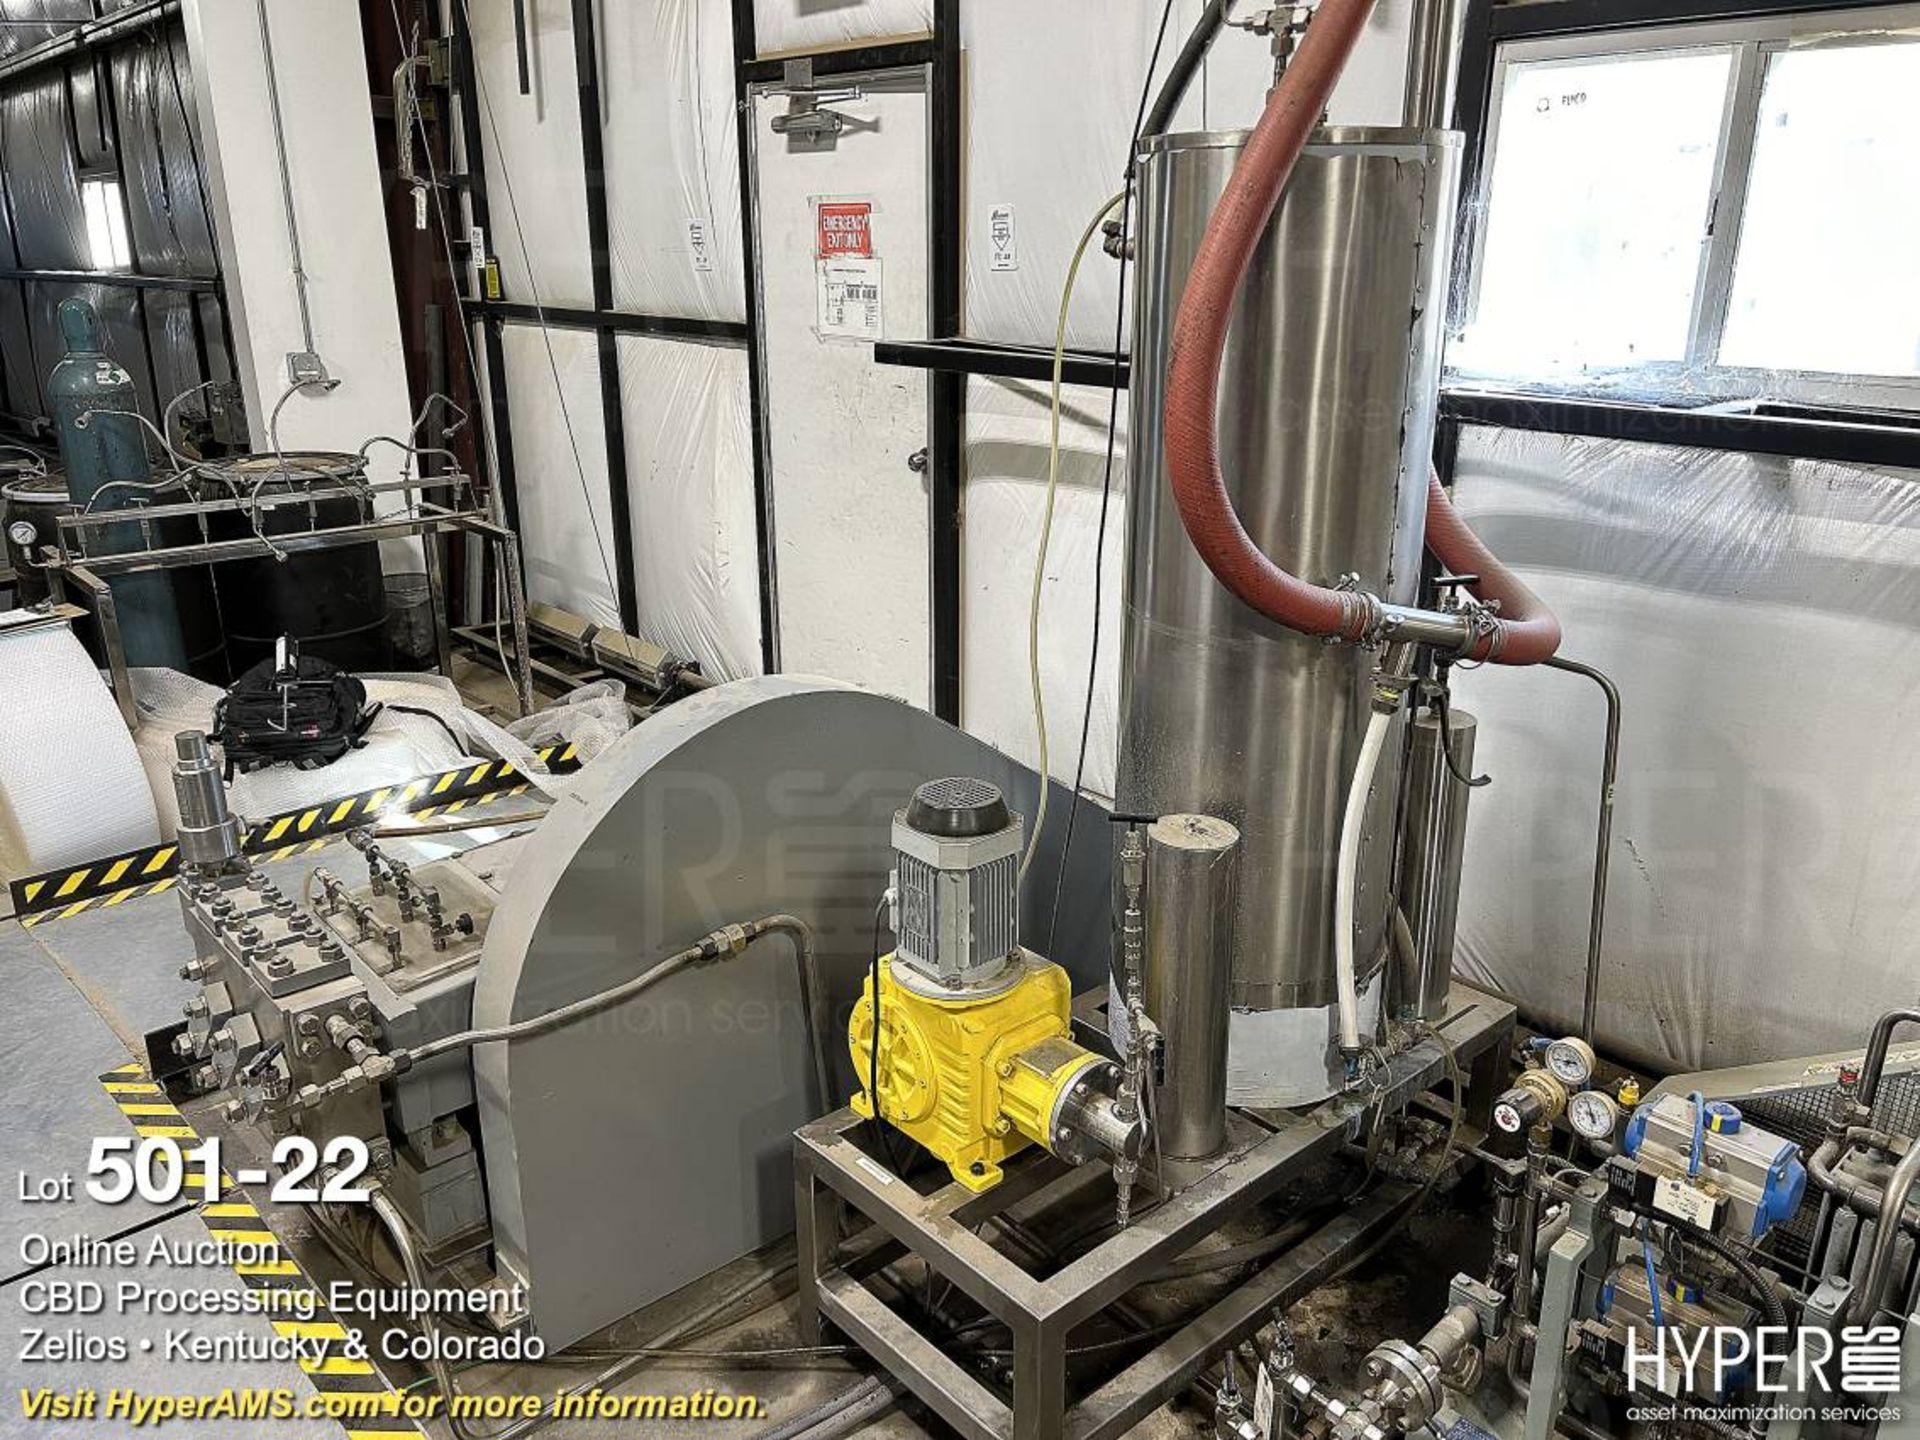 Super Critical 300-Liter C02 Extraction System - Image 22 of 25